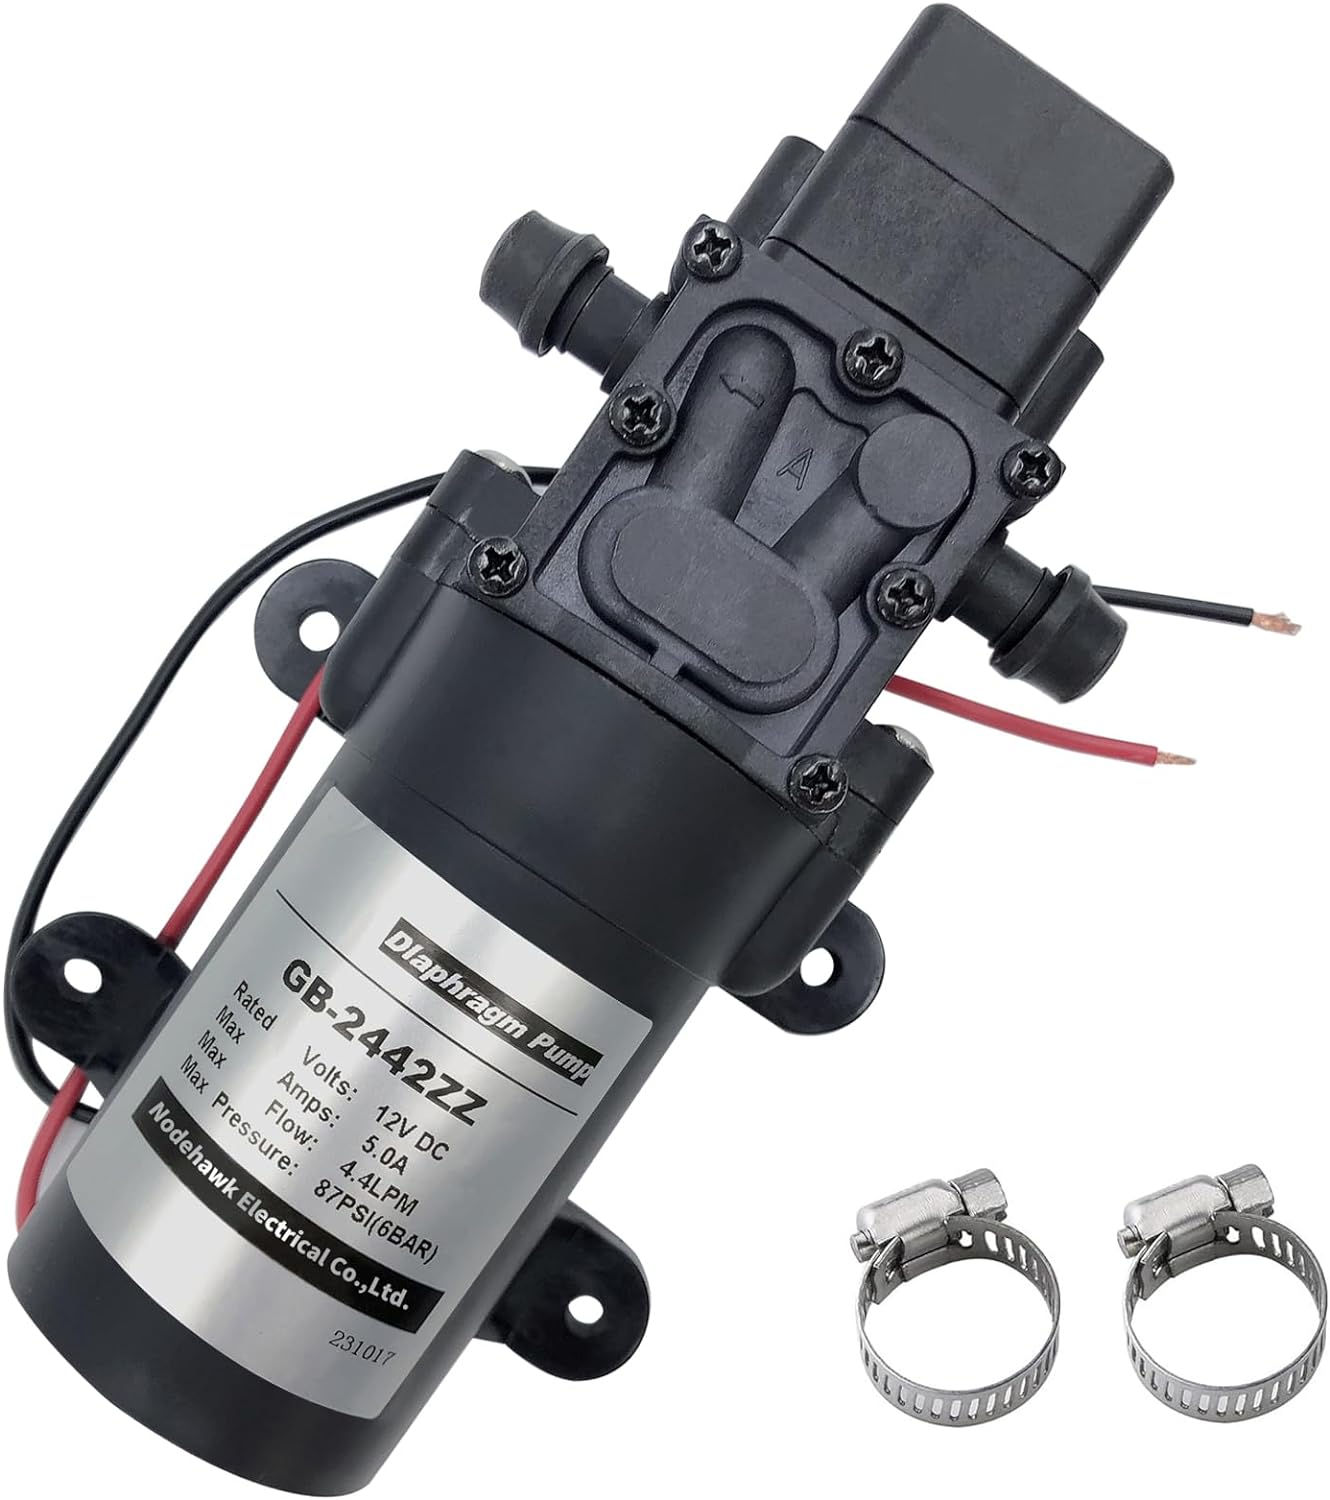 12V DC Water Transfer Pump Diaphragm Pump with 2 Hose Clamps,Self Priming Sprayer Pump with Pressure Switch 4.5 L/Min 1.2 GPM 87 PSI Adjustable,Caravan RV Boat Marine Agricultural Spraying Water Pump